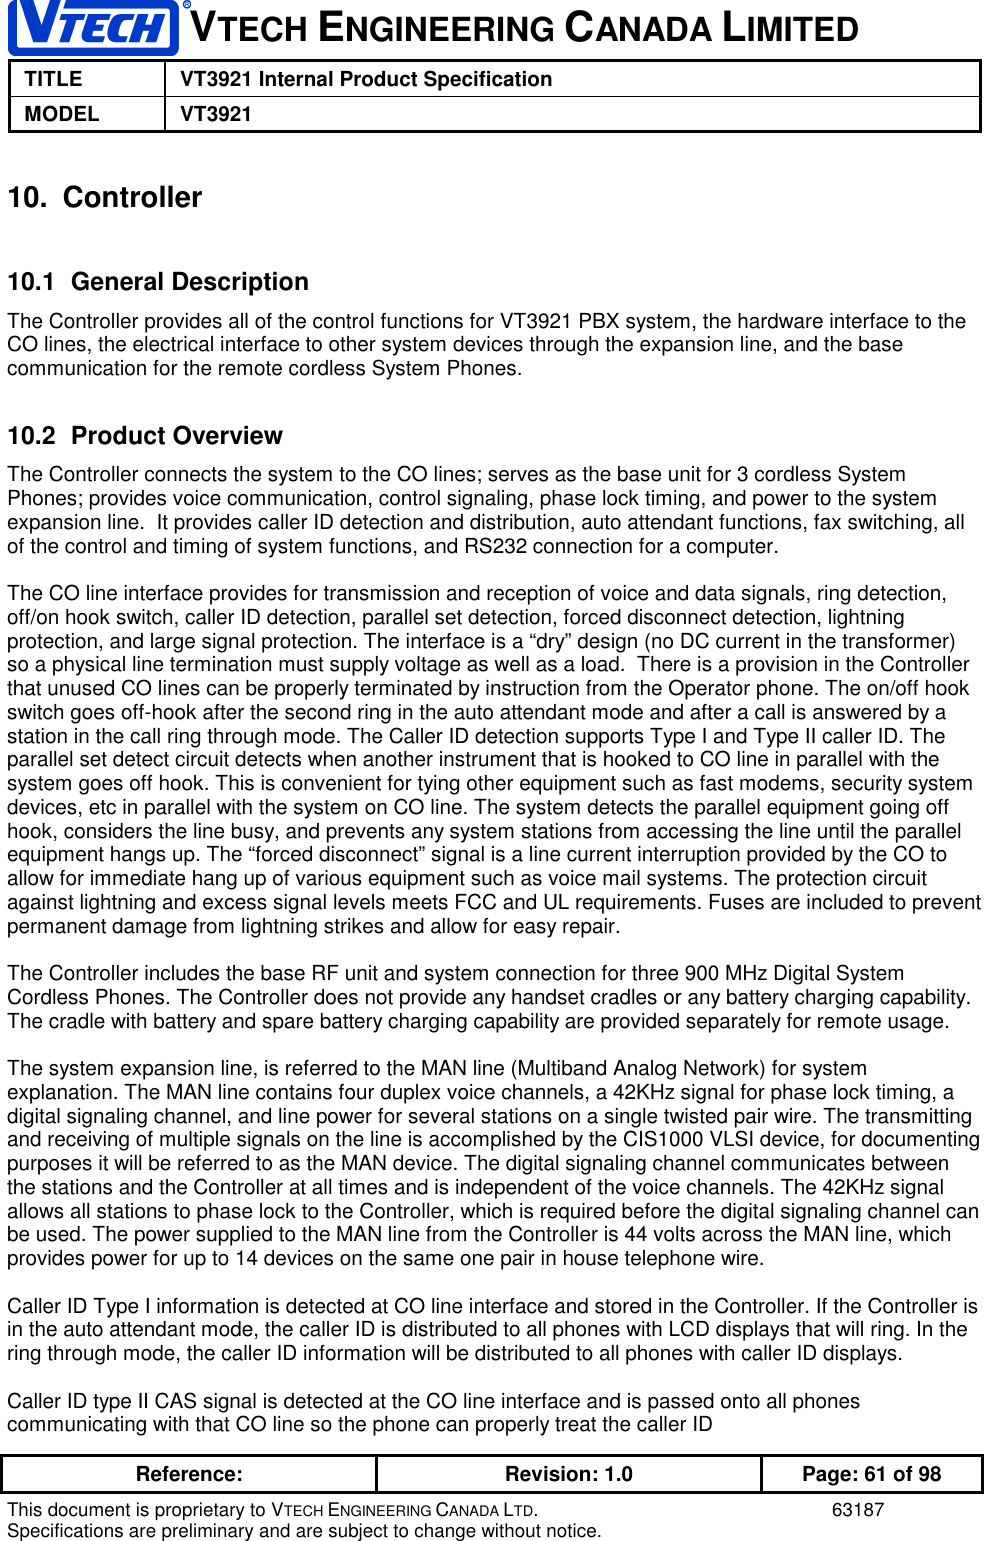 VTECH ENGINEERING CANADA LIMITEDTITLE VT3921 Internal Product SpecificationMODEL VT3921Reference: Revision: 1.0 Page: 61 of 98This document is proprietary to VTECH ENGINEERING CANADA LTD. 63187Specifications are preliminary and are subject to change without notice.10. Controller10.1 General DescriptionThe Controller provides all of the control functions for VT3921 PBX system, the hardware interface to theCO lines, the electrical interface to other system devices through the expansion line, and the basecommunication for the remote cordless System Phones.10.2 Product OverviewThe Controller connects the system to the CO lines; serves as the base unit for 3 cordless SystemPhones; provides voice communication, control signaling, phase lock timing, and power to the systemexpansion line.  It provides caller ID detection and distribution, auto attendant functions, fax switching, allof the control and timing of system functions, and RS232 connection for a computer.The CO line interface provides for transmission and reception of voice and data signals, ring detection,off/on hook switch, caller ID detection, parallel set detection, forced disconnect detection, lightningprotection, and large signal protection. The interface is a “dry” design (no DC current in the transformer)so a physical line termination must supply voltage as well as a load.  There is a provision in the Controllerthat unused CO lines can be properly terminated by instruction from the Operator phone. The on/off hookswitch goes off-hook after the second ring in the auto attendant mode and after a call is answered by astation in the call ring through mode. The Caller ID detection supports Type I and Type II caller ID. Theparallel set detect circuit detects when another instrument that is hooked to CO line in parallel with thesystem goes off hook. This is convenient for tying other equipment such as fast modems, security systemdevices, etc in parallel with the system on CO line. The system detects the parallel equipment going offhook, considers the line busy, and prevents any system stations from accessing the line until the parallelequipment hangs up. The “forced disconnect” signal is a line current interruption provided by the CO toallow for immediate hang up of various equipment such as voice mail systems. The protection circuitagainst lightning and excess signal levels meets FCC and UL requirements. Fuses are included to preventpermanent damage from lightning strikes and allow for easy repair.The Controller includes the base RF unit and system connection for three 900 MHz Digital SystemCordless Phones. The Controller does not provide any handset cradles or any battery charging capability.The cradle with battery and spare battery charging capability are provided separately for remote usage.The system expansion line, is referred to the MAN line (Multiband Analog Network) for systemexplanation. The MAN line contains four duplex voice channels, a 42KHz signal for phase lock timing, adigital signaling channel, and line power for several stations on a single twisted pair wire. The transmittingand receiving of multiple signals on the line is accomplished by the CIS1000 VLSI device, for documentingpurposes it will be referred to as the MAN device. The digital signaling channel communicates betweenthe stations and the Controller at all times and is independent of the voice channels. The 42KHz signalallows all stations to phase lock to the Controller, which is required before the digital signaling channel canbe used. The power supplied to the MAN line from the Controller is 44 volts across the MAN line, whichprovides power for up to 14 devices on the same one pair in house telephone wire.Caller ID Type I information is detected at CO line interface and stored in the Controller. If the Controller isin the auto attendant mode, the caller ID is distributed to all phones with LCD displays that will ring. In thering through mode, the caller ID information will be distributed to all phones with caller ID displays.Caller ID type II CAS signal is detected at the CO line interface and is passed onto all phonescommunicating with that CO line so the phone can properly treat the caller ID